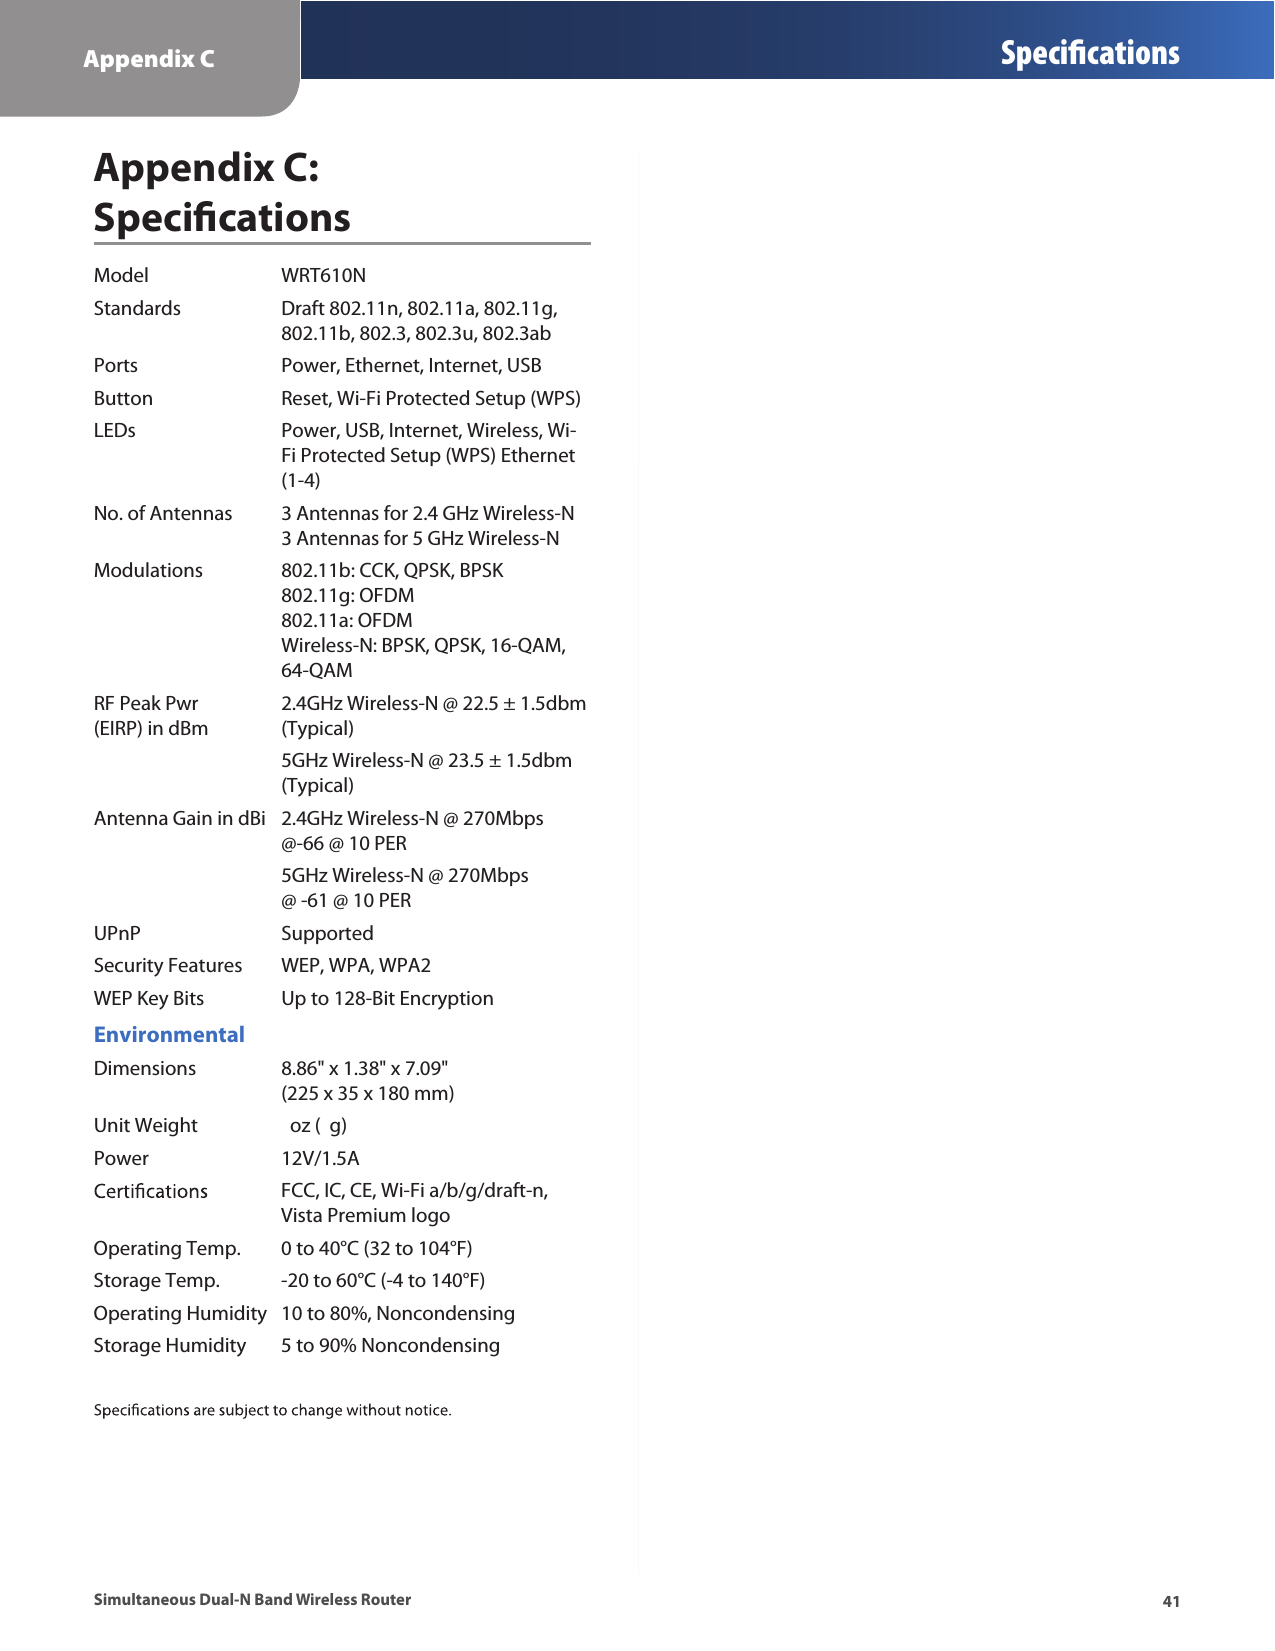 Appendix C Specications41Simultaneous Dual-N Band Wireless RouterAppendix C:  SpecicationsModel  WRT610NStandards  Draft 802.11n, 802.11a, 802.11g,   802.11b, 802.3, 802.3u, 802.3abPorts  Power, Ethernet, Internet, USBButton  Reset, Wi-Fi Protected Setup (WPS)LEDs  Power, USB, Internet, Wireless, Wi-   Fi Protected Setup (WPS) Ethernet    (1-4)No. of Antennas  3 Antennas for 2.4 GHz Wireless-N   3 Antennas for 5 GHz Wireless-NModulations  802.11b: CCK, QPSK, BPSK    802.11g: OFDM   802.11a: OFDM   Wireless-N: BPSK, QPSK, 16-QAM,   64-QAMRF Peak Pwr    2.4GHz Wireless-N @ 22.5 ± 1.5dbm  (EIRP) in dBm  (Typical)  5GHz Wireless-N @ 23.5 ± 1.5dbm    (Typical) Antenna Gain in dBi  2.4GHz Wireless-N @ 270Mbps    @-66 @ 10 PER  5GHz Wireless-N @ 270Mbps      @ -61 @ 10 PERUPnP   SupportedSecurity Features  WEP, WPA, WPA2WEP Key Bits  Up to 128-Bit EncryptionEnvironmentalDimensions  8.86&quot; x 1.38&quot; x 7.09&quot;   (225 x 35 x 180 mm)Unit Weight    oz (  g)Power  12V/1.5A  FCC, IC, CE, Wi-Fi a/b/g/draft-n,    Vista Premium logoOperating Temp.  0 to 40°C (32 to 104°F)Storage Temp.  -20 to 60°C (-4 to 140°F)Operating Humidity  10 to 80%, NoncondensingStorage Humidity  5 to 90% Noncondensing